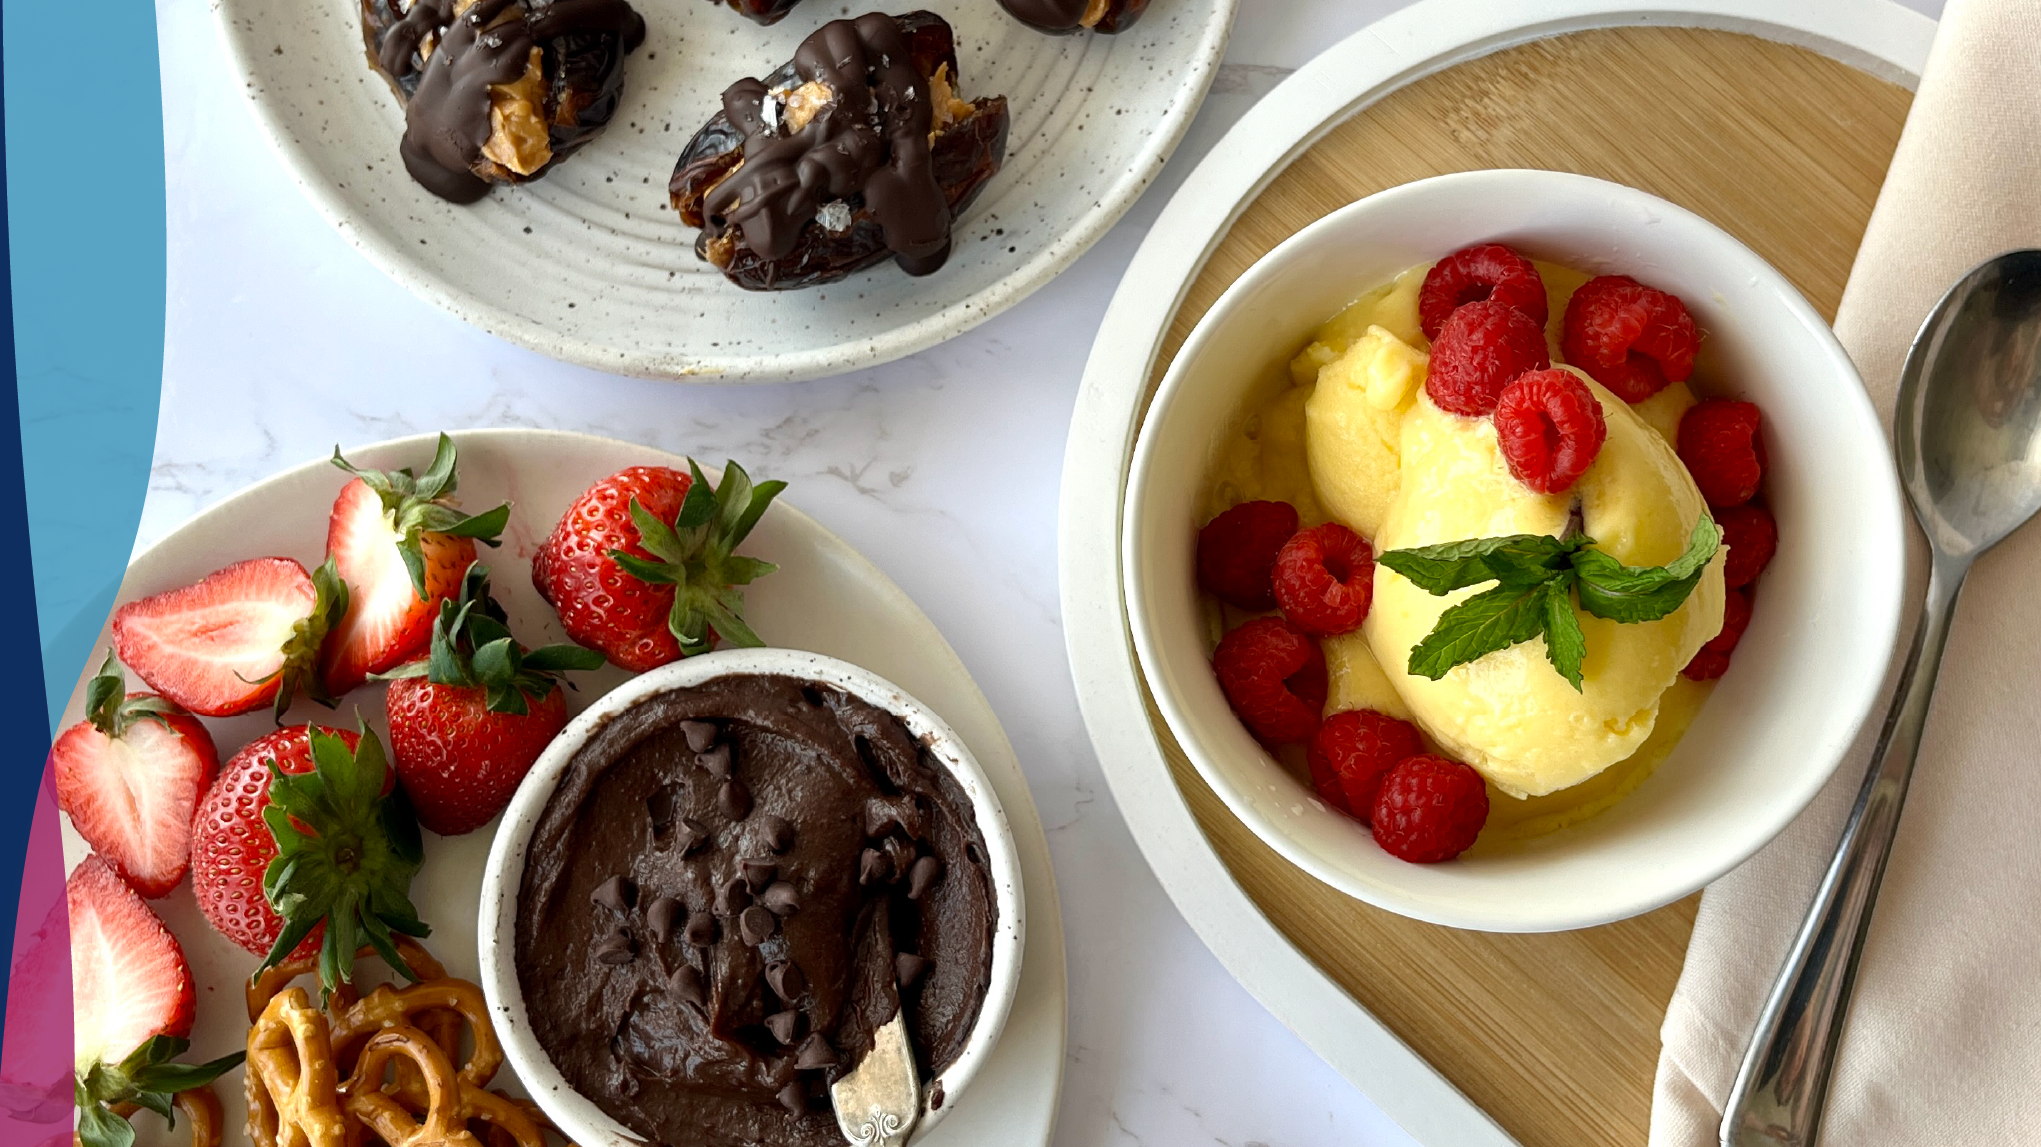 Chocolate-covered dates, lemon sorbet with raspberries, and chocolate hummus with strawberries and pretzels.